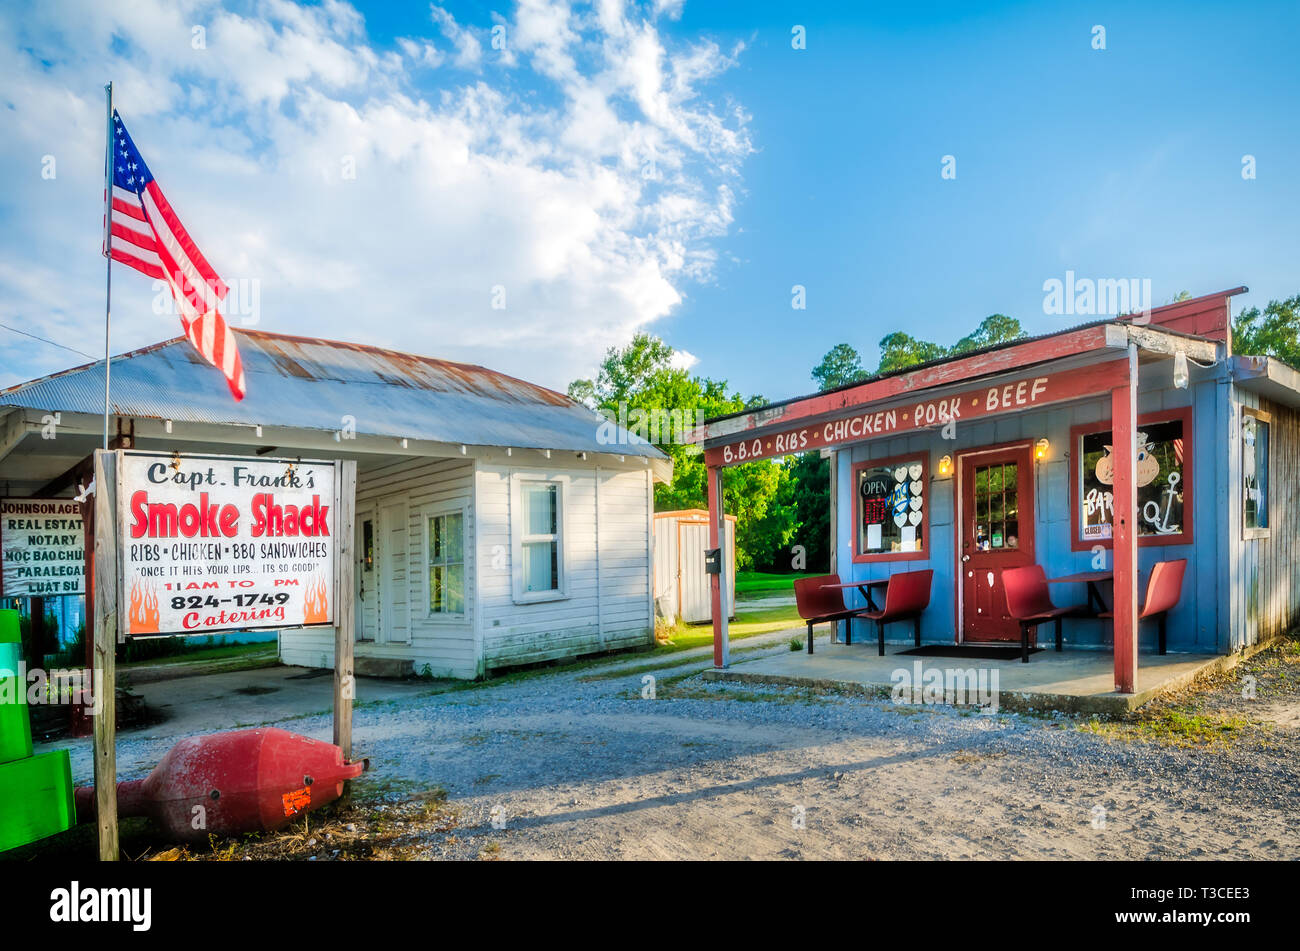 Capt. Frank’s Smoke Shack is pictured beside Johnson Agency real estate office, Aug. 15, 2015, in Bayou La Batre, Alabama. Stock Photo